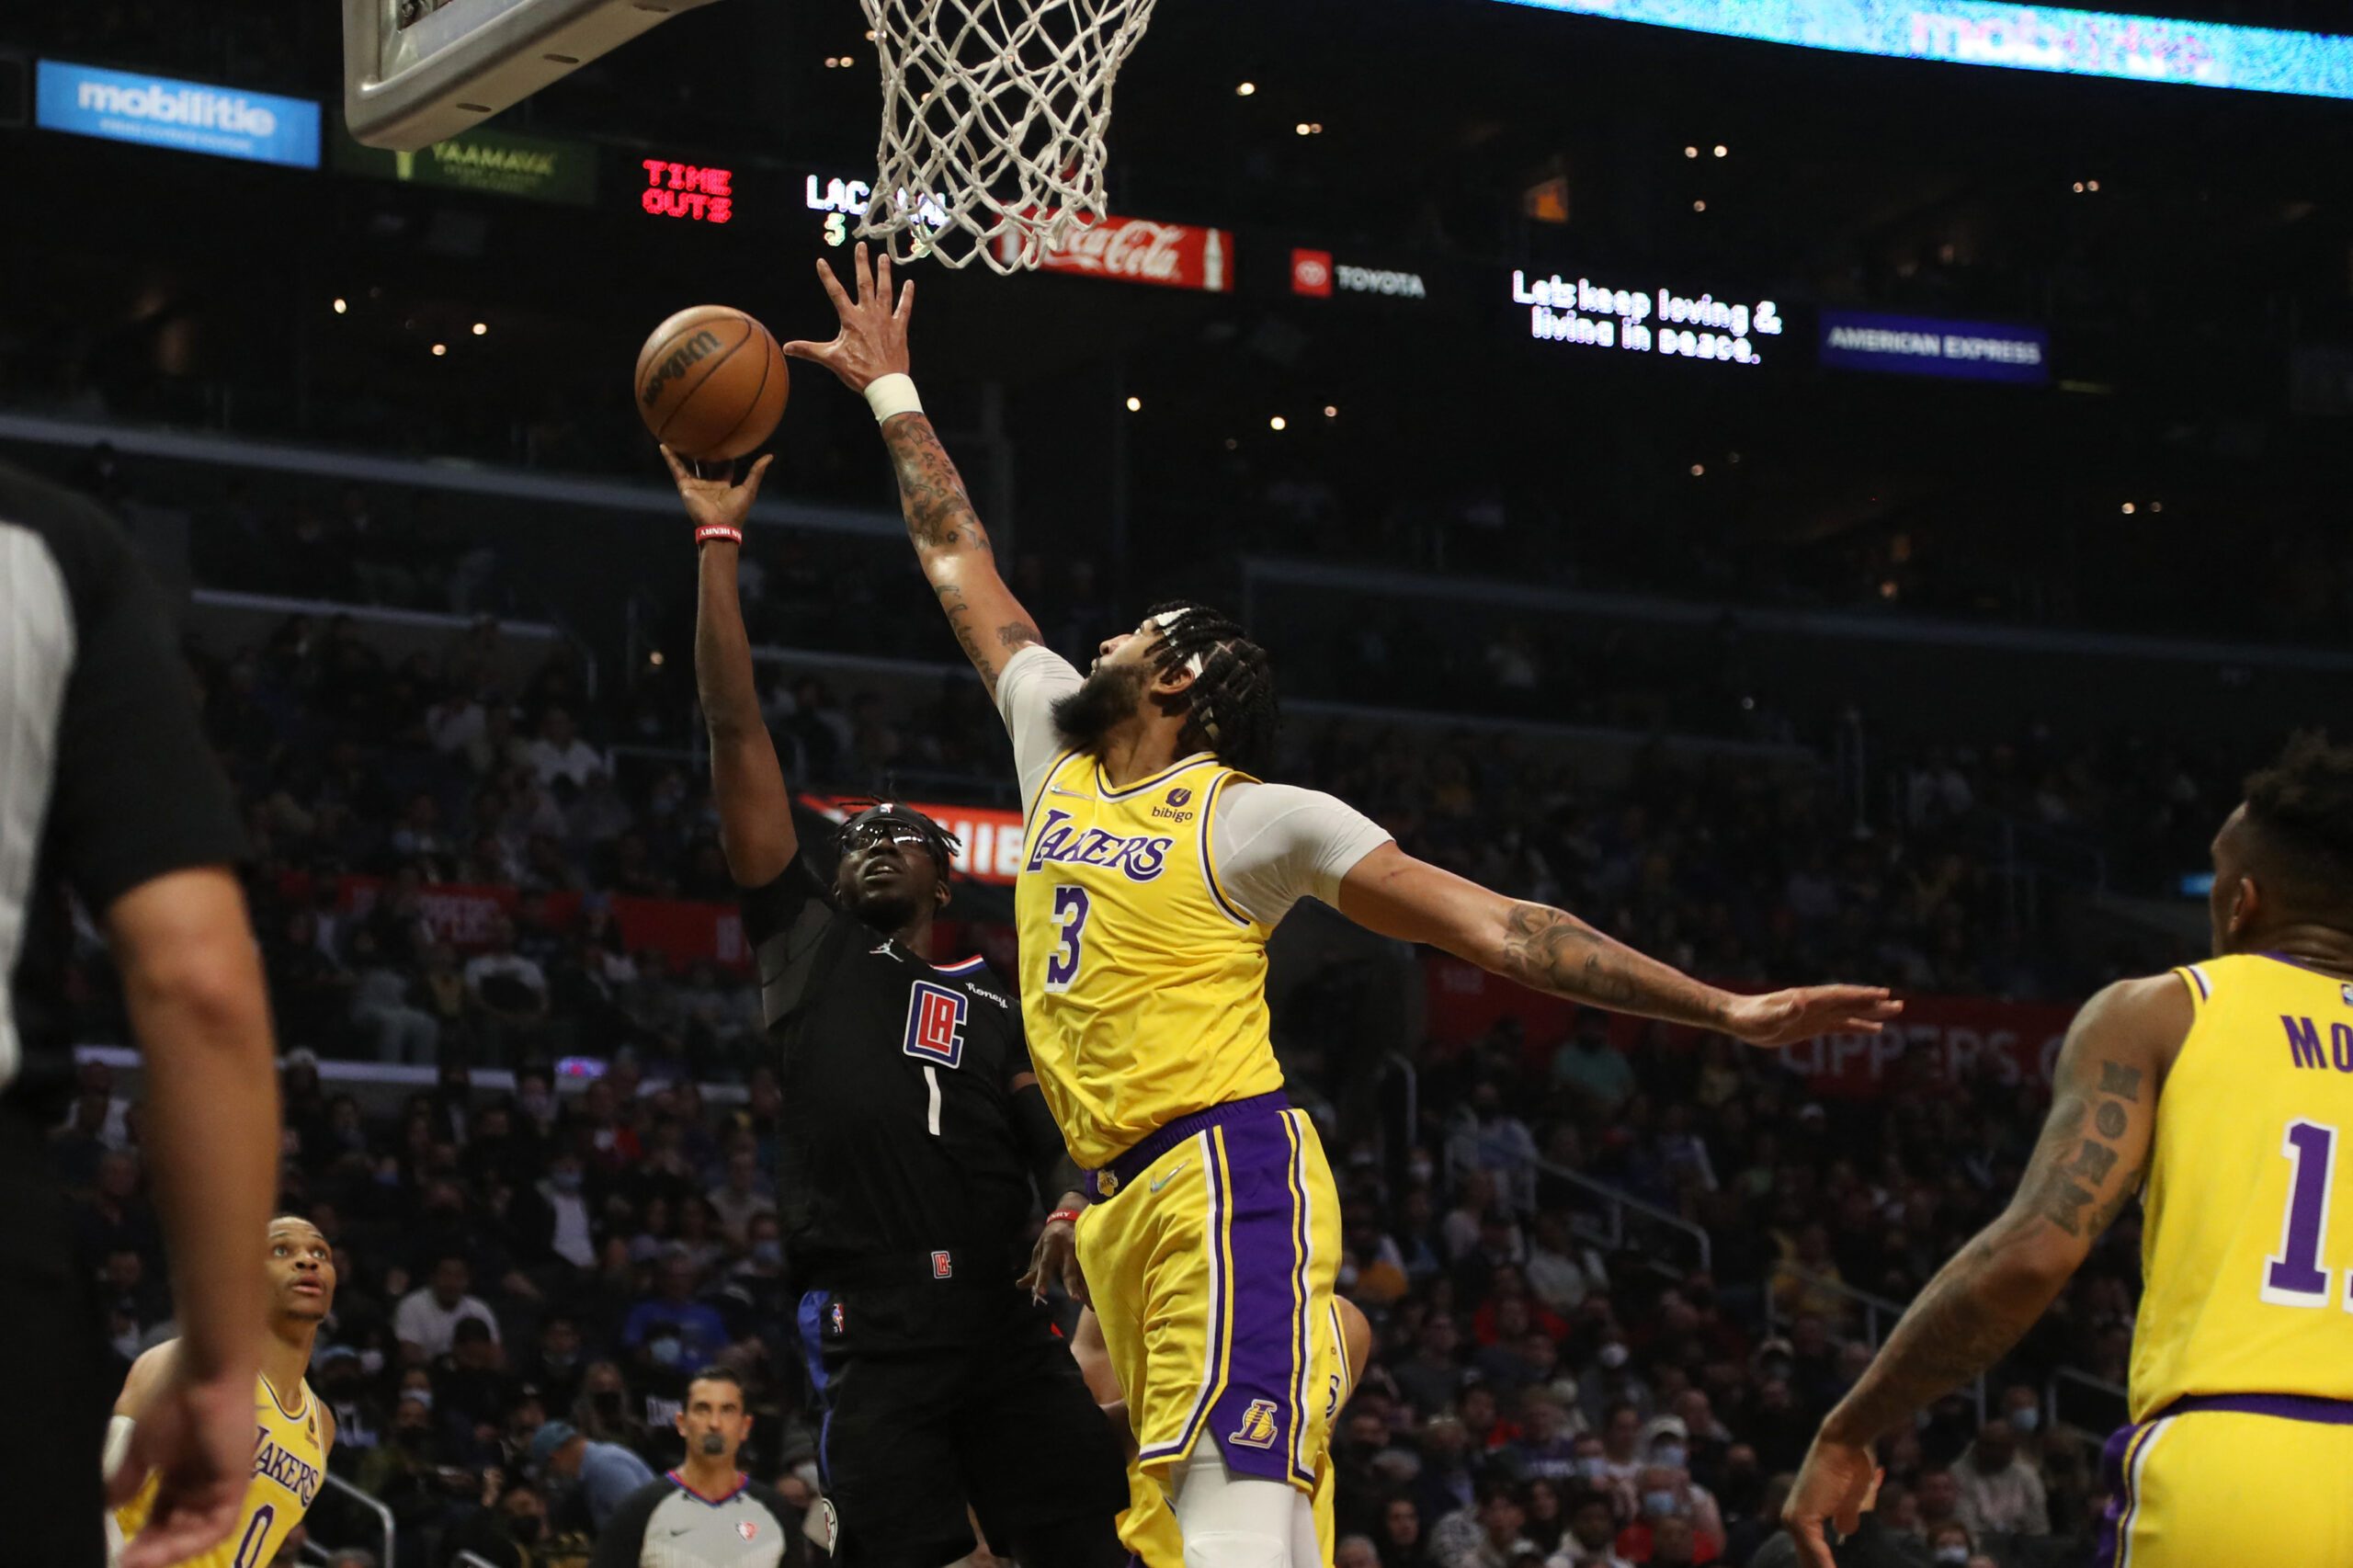 Jackson nails late-game layup as Clippers get by Lakers